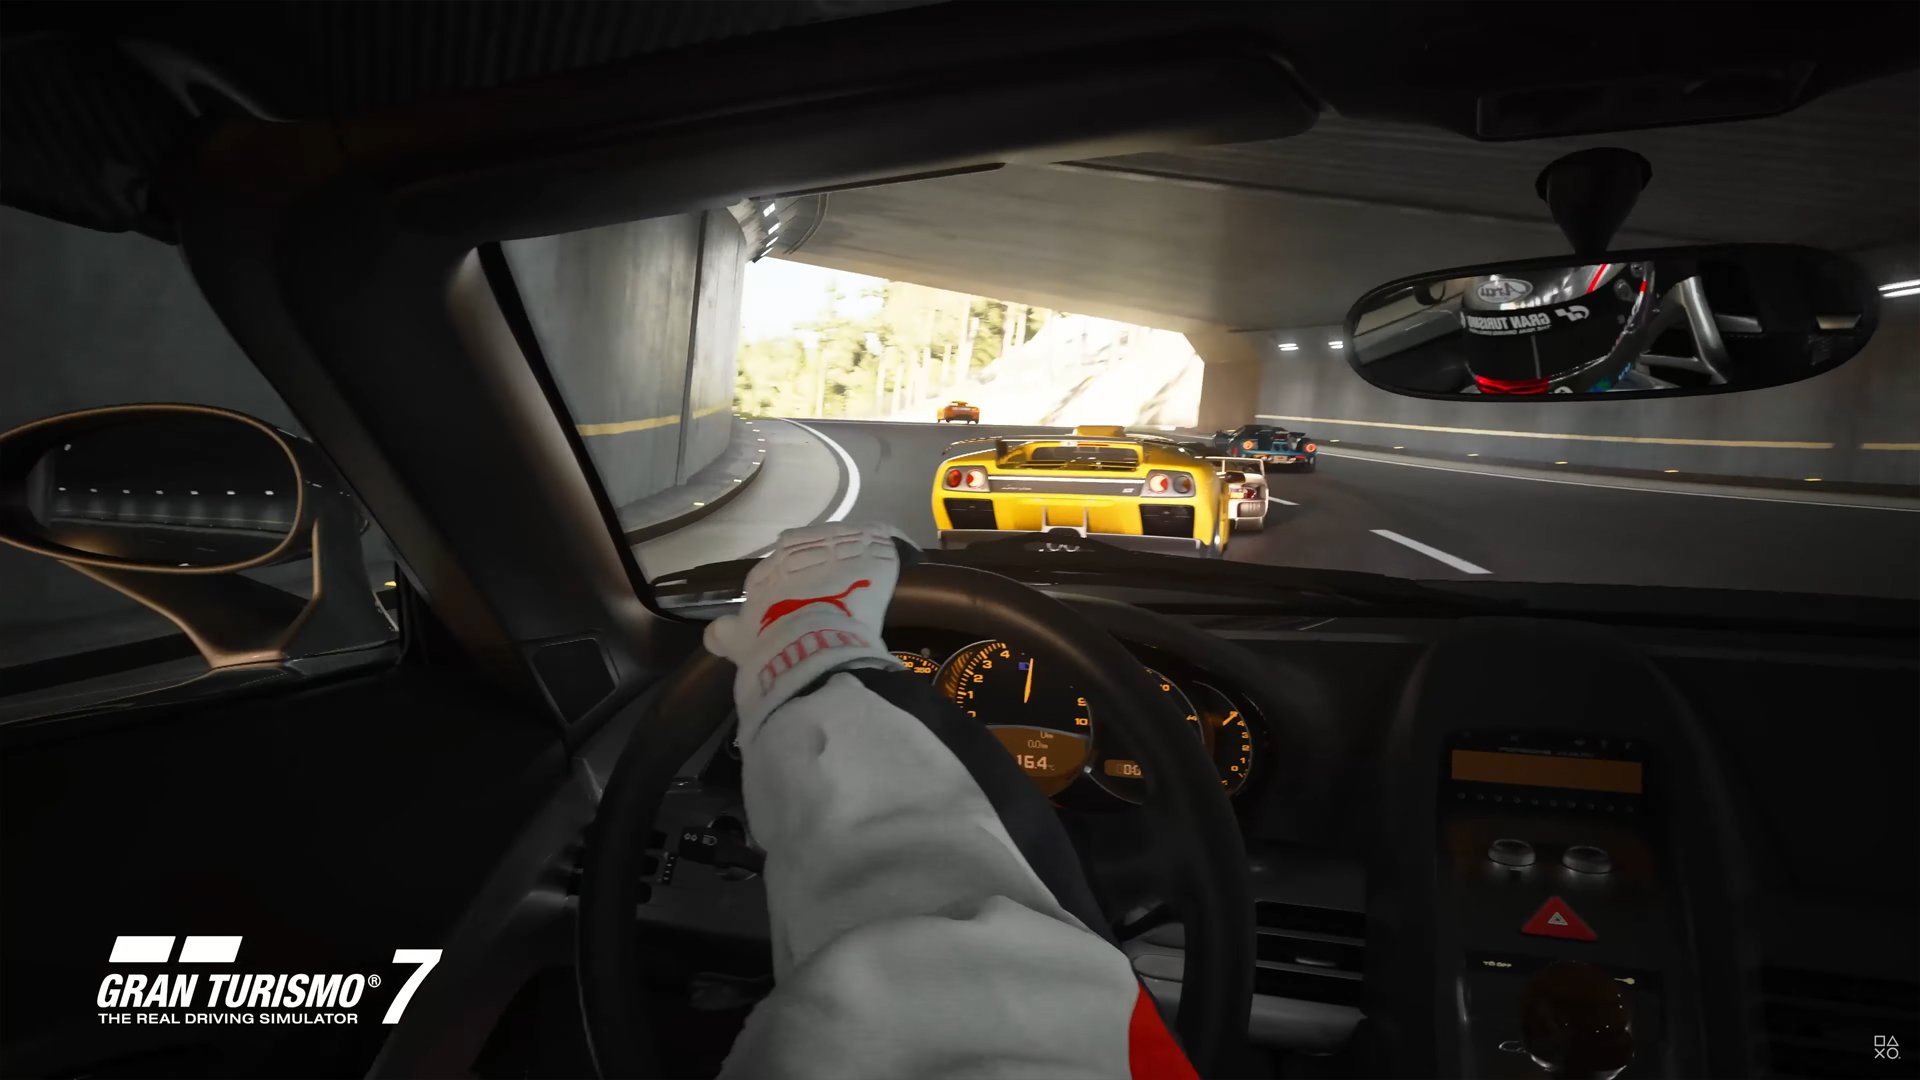 Gran Turismo 7 Appears in New PlayStation 5 Promotional Video